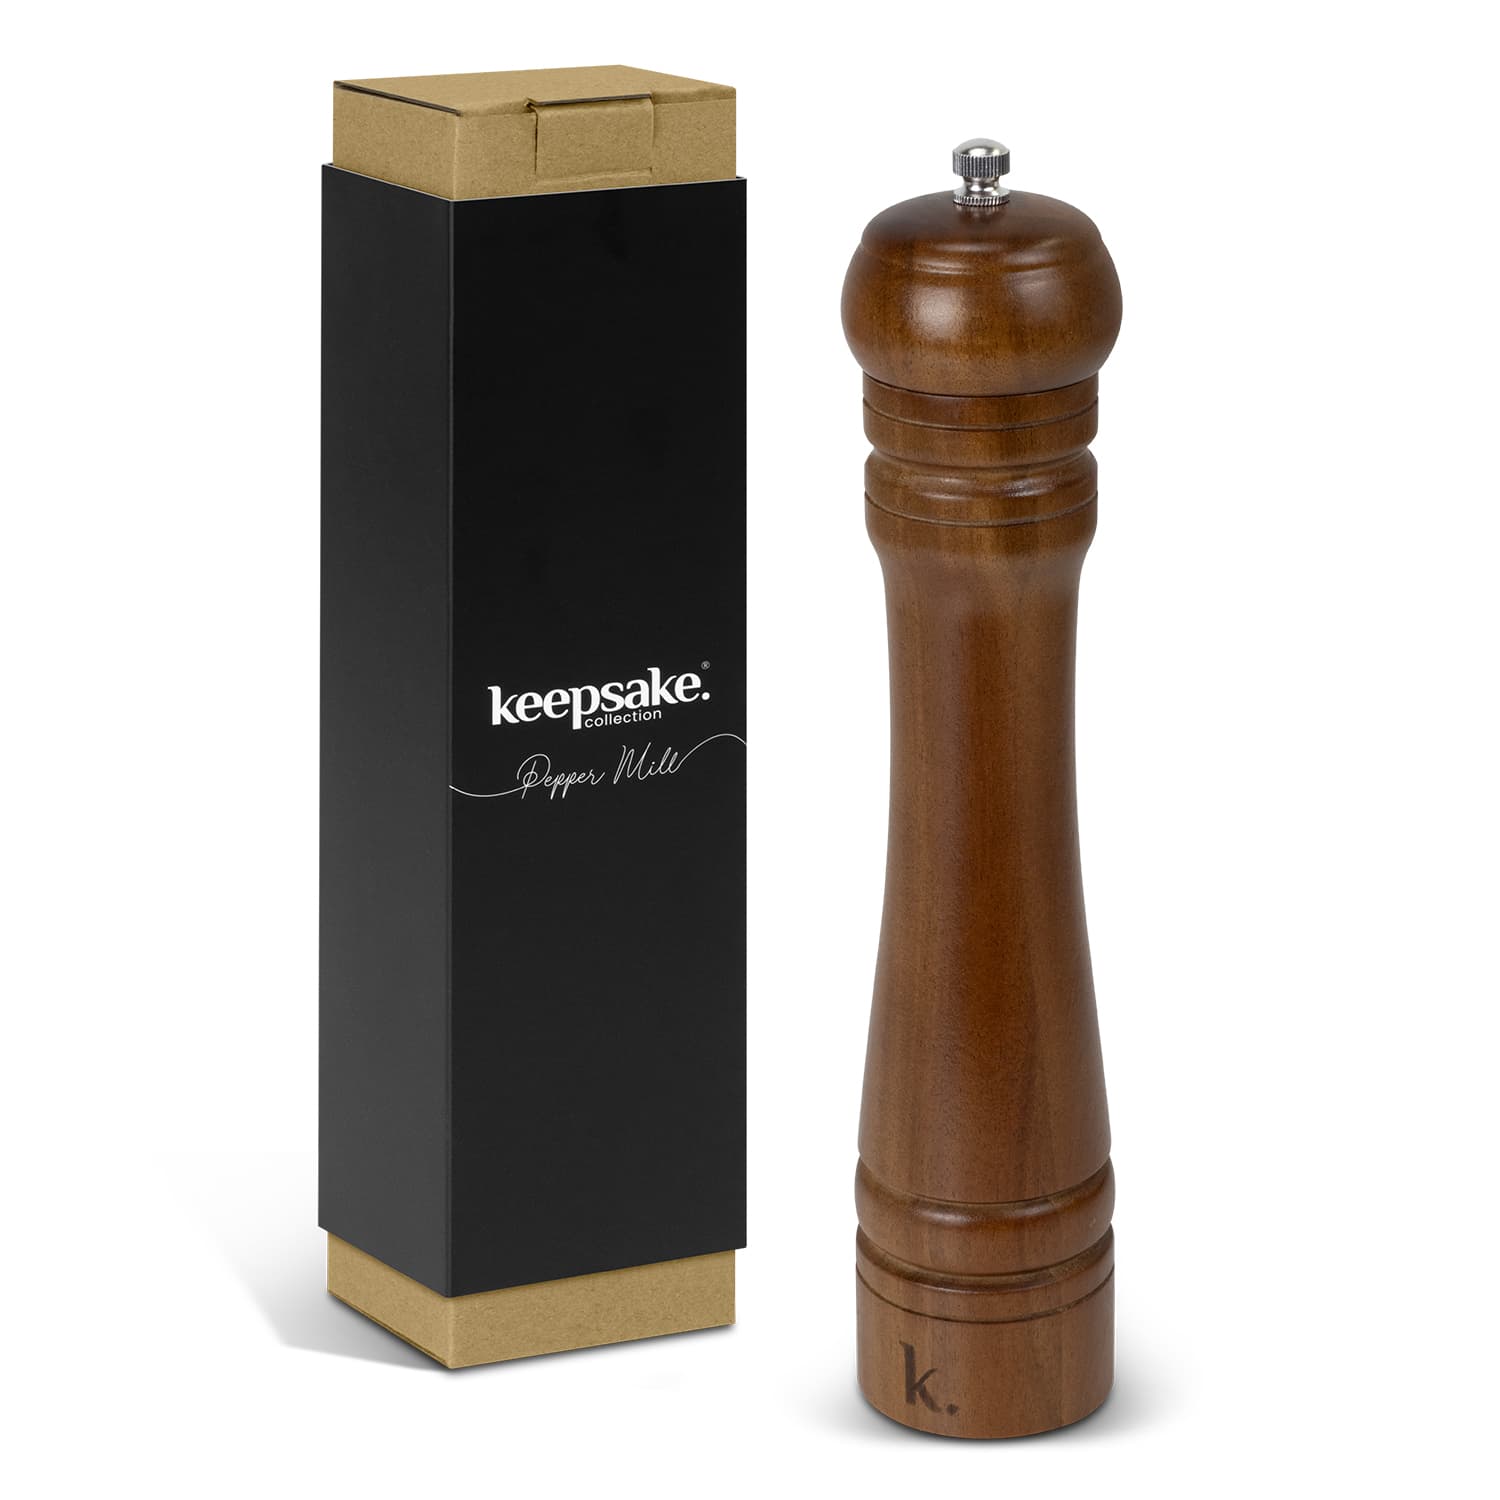 Keepsake Pepper Mill | Custom Pepper Mill | Customised Pepper Mill | Personalised Pepper Mill | Custom Merchandise | Merchandise | Customised Gifts NZ | Corporate Gifts | Promotional Products NZ | Branded merchandise NZ | Branded Merch | 